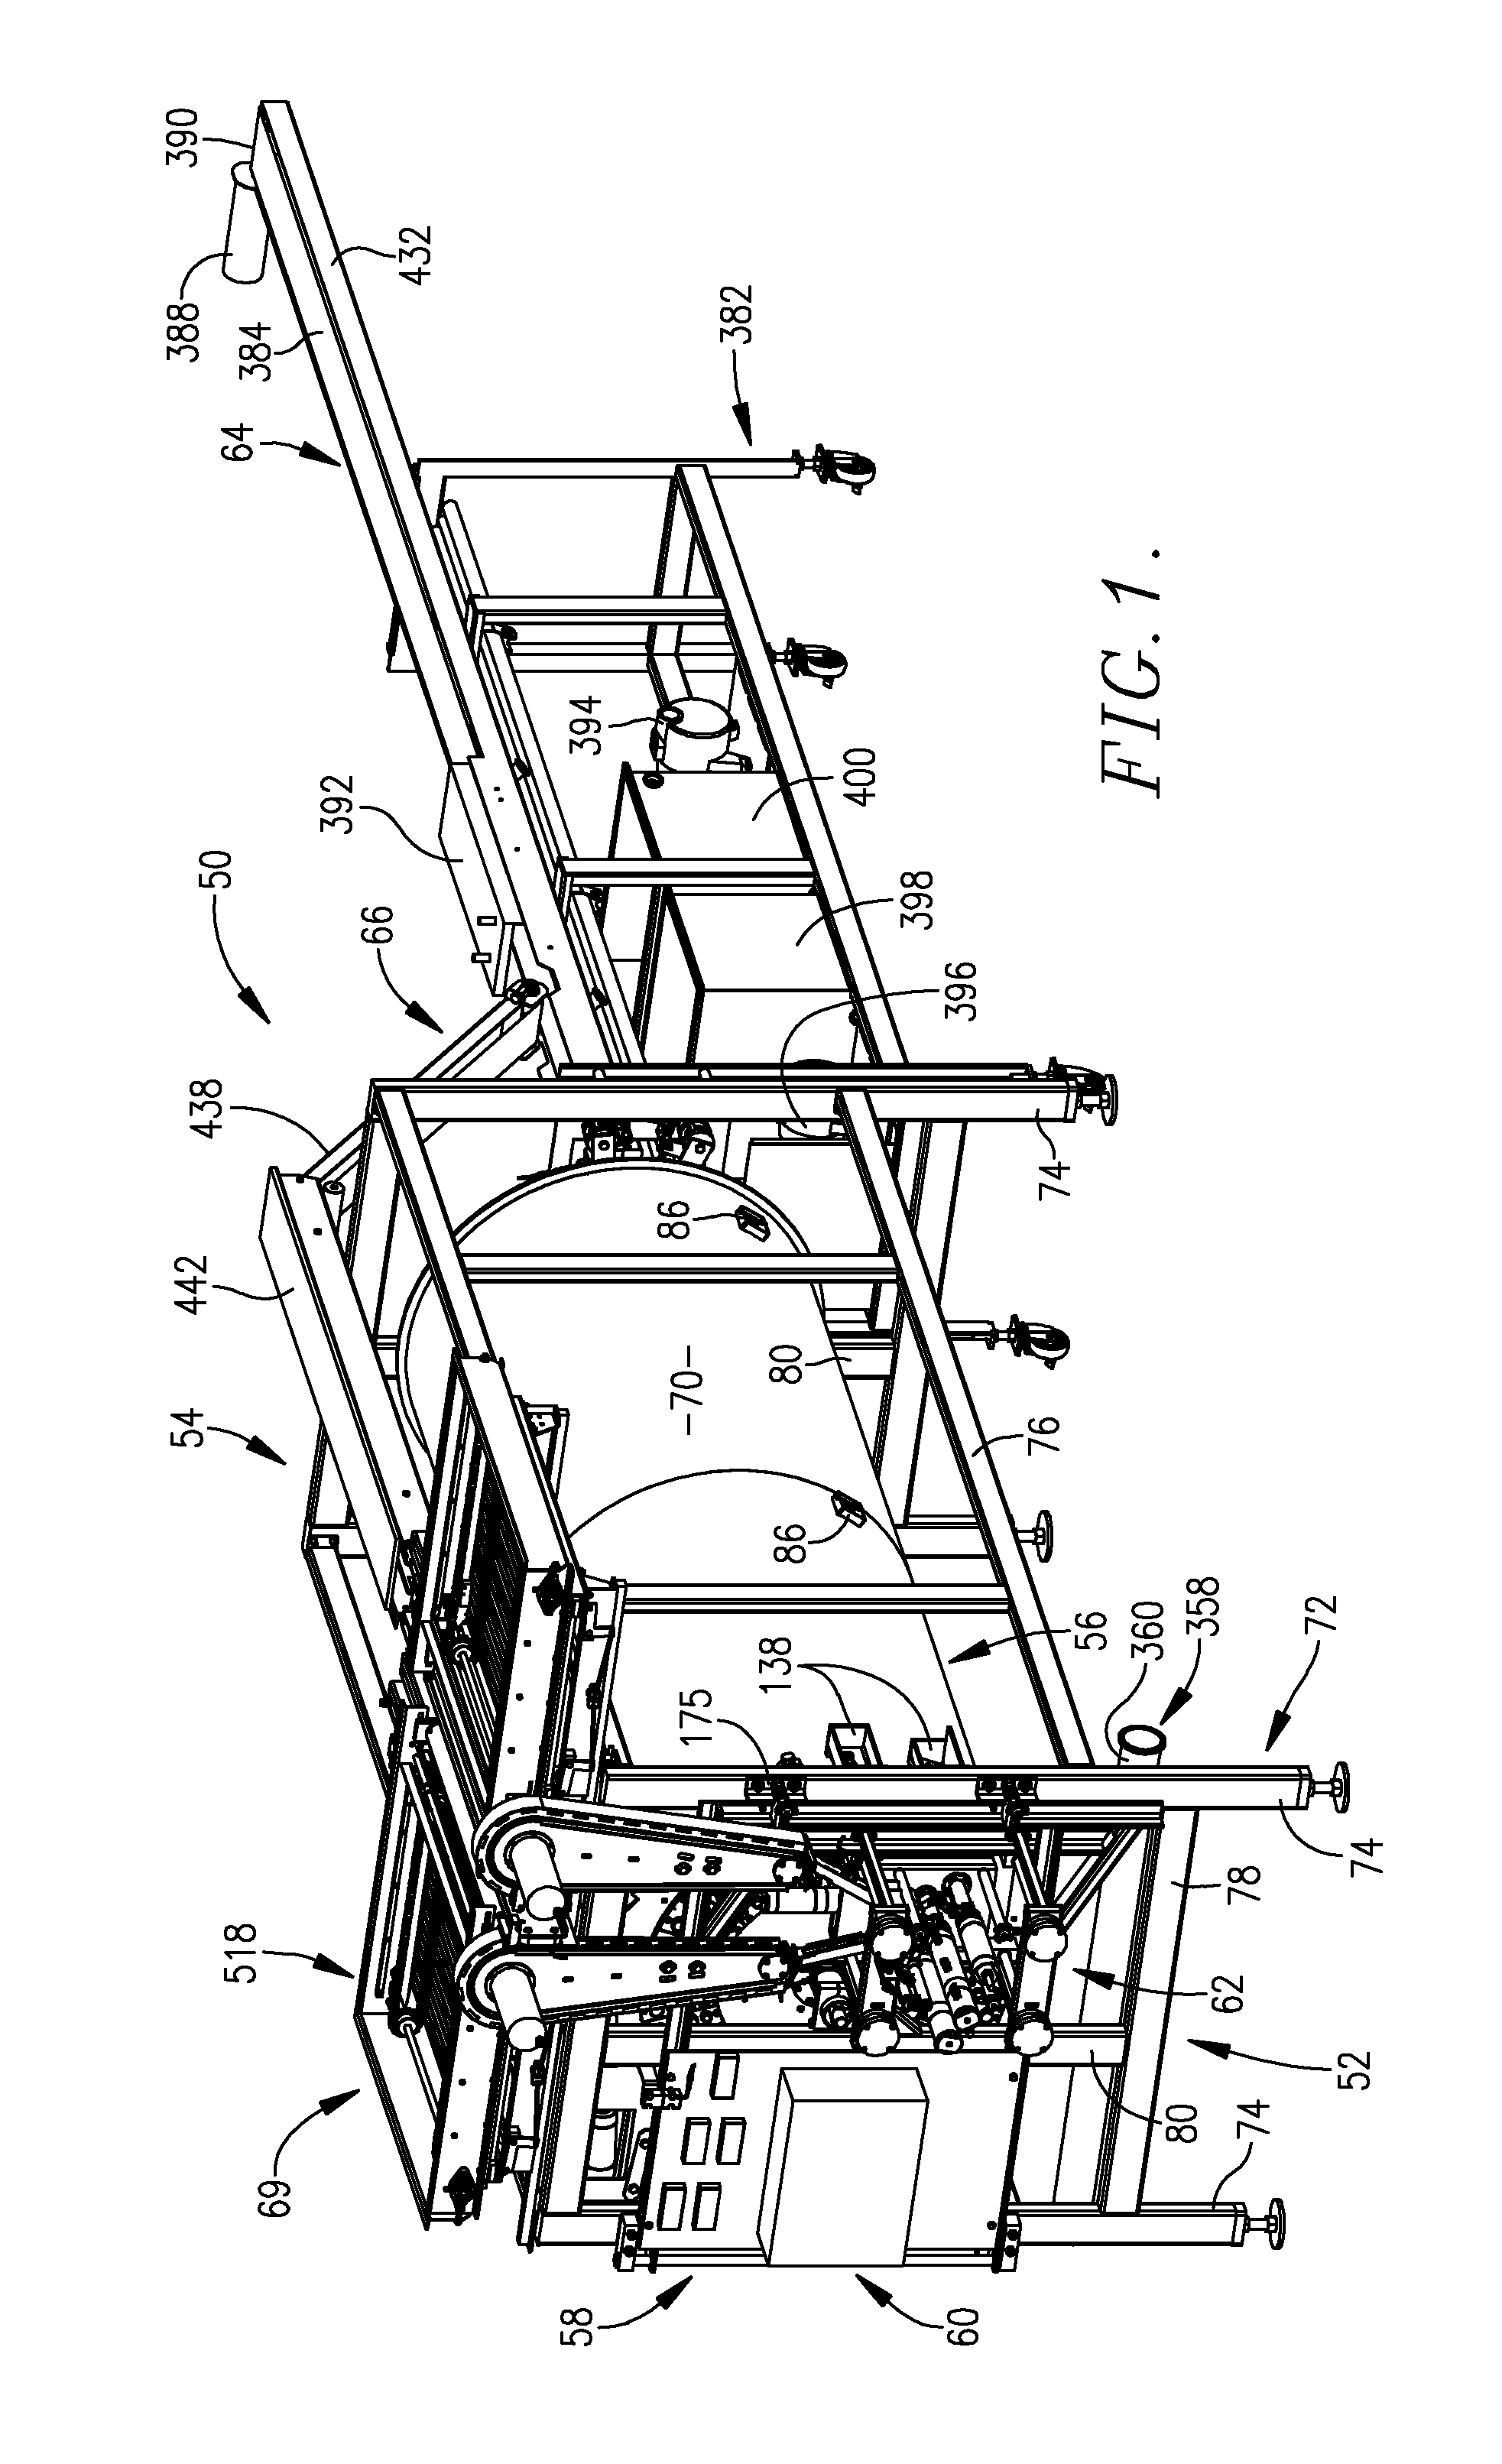 Method and apparatus for production of elongated meat products without casings